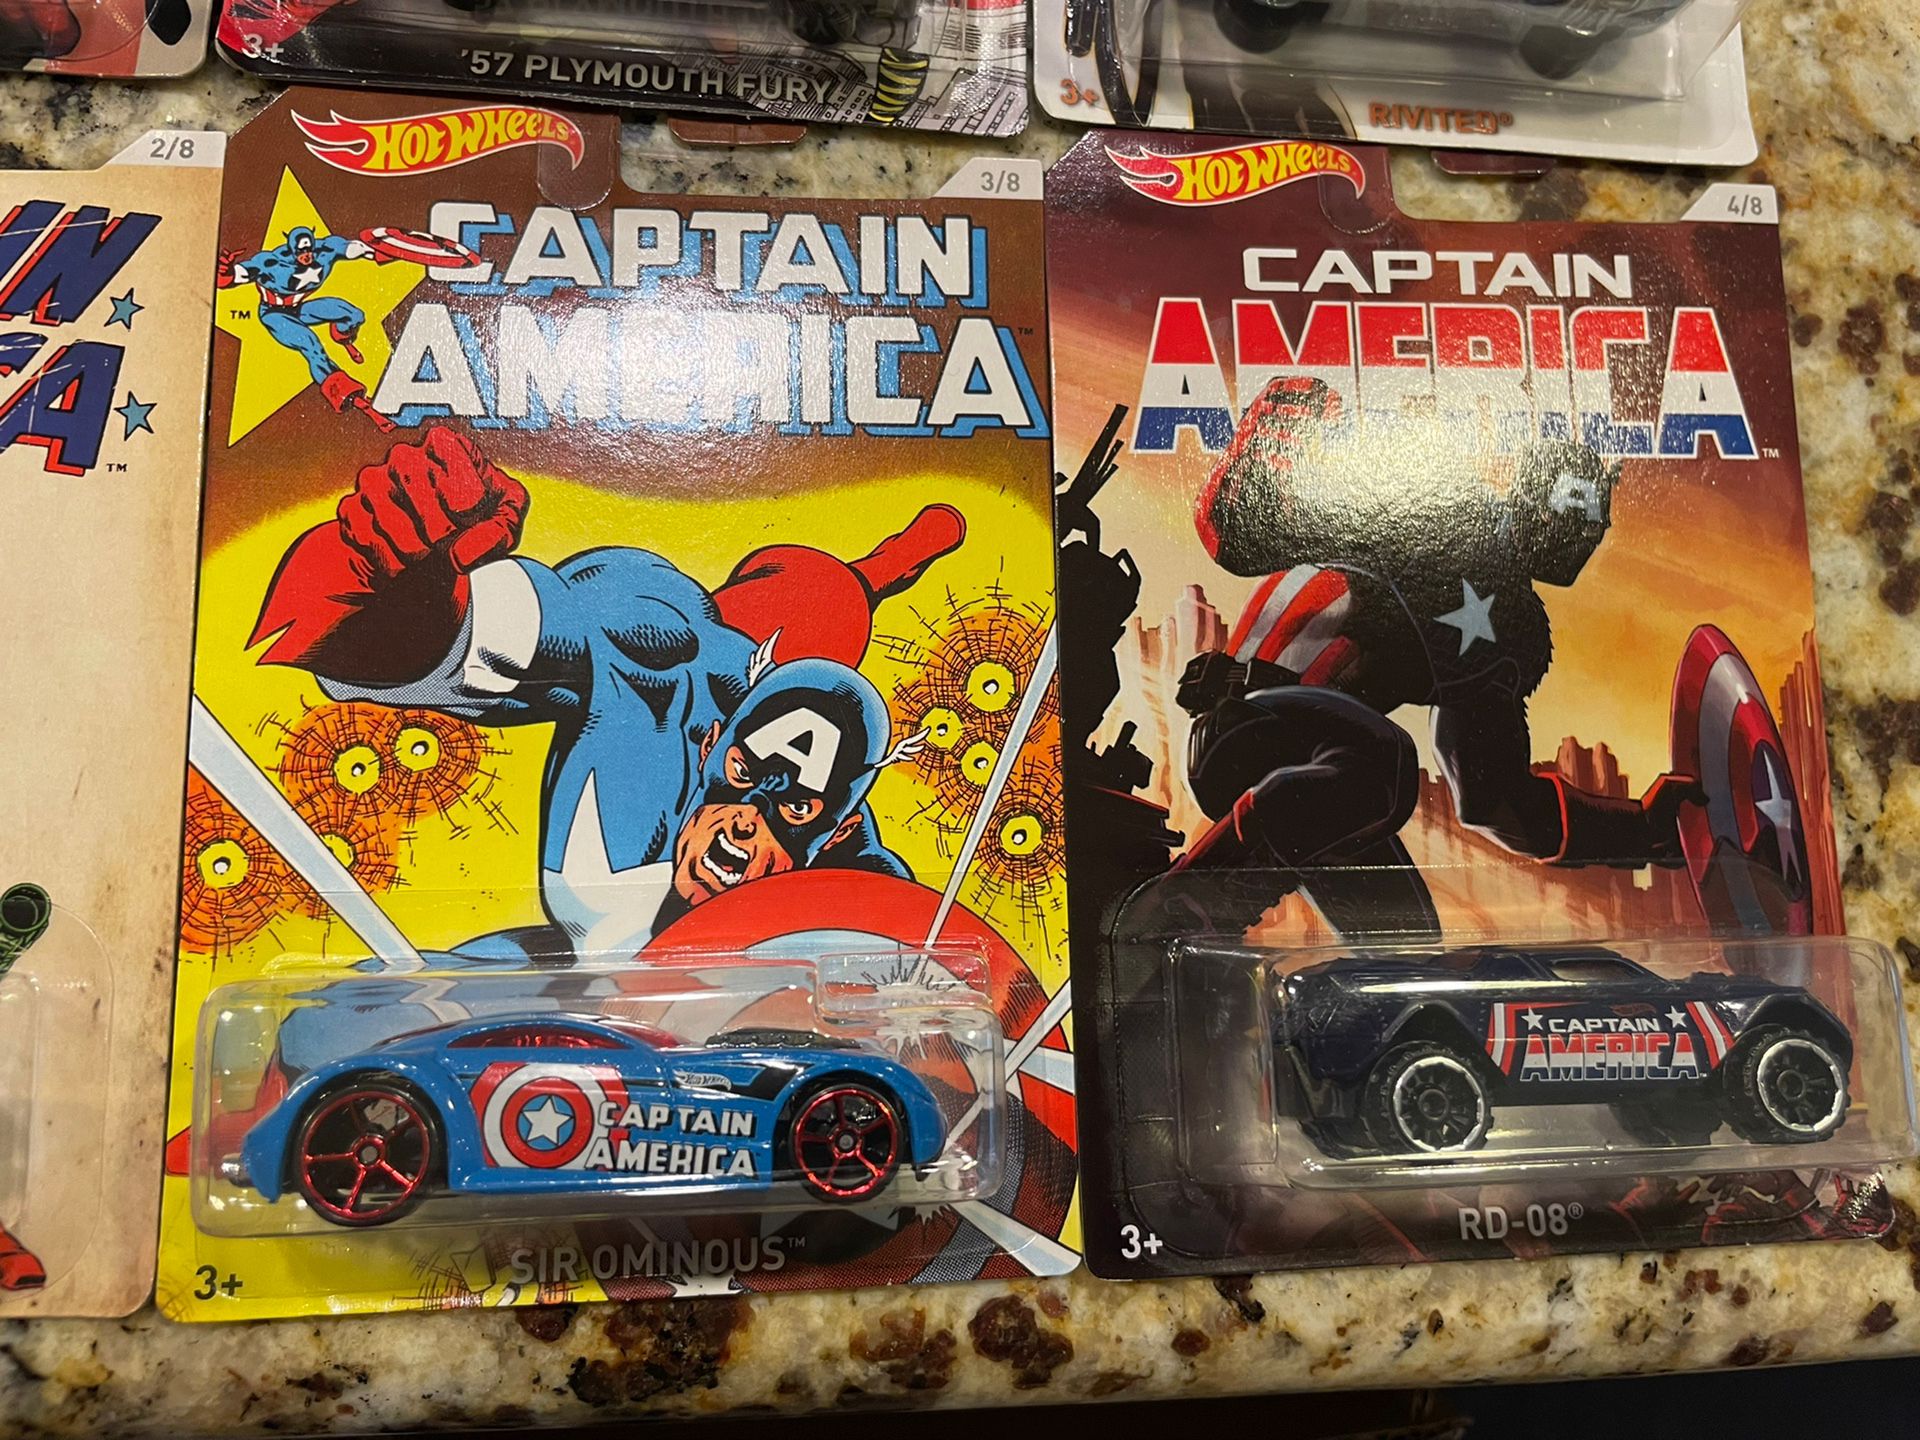 2015 Hot Wheels Captain America Complete Set of 8 With 3 0f The 7 2017 Wal-Mart Exclusive Avengers Set